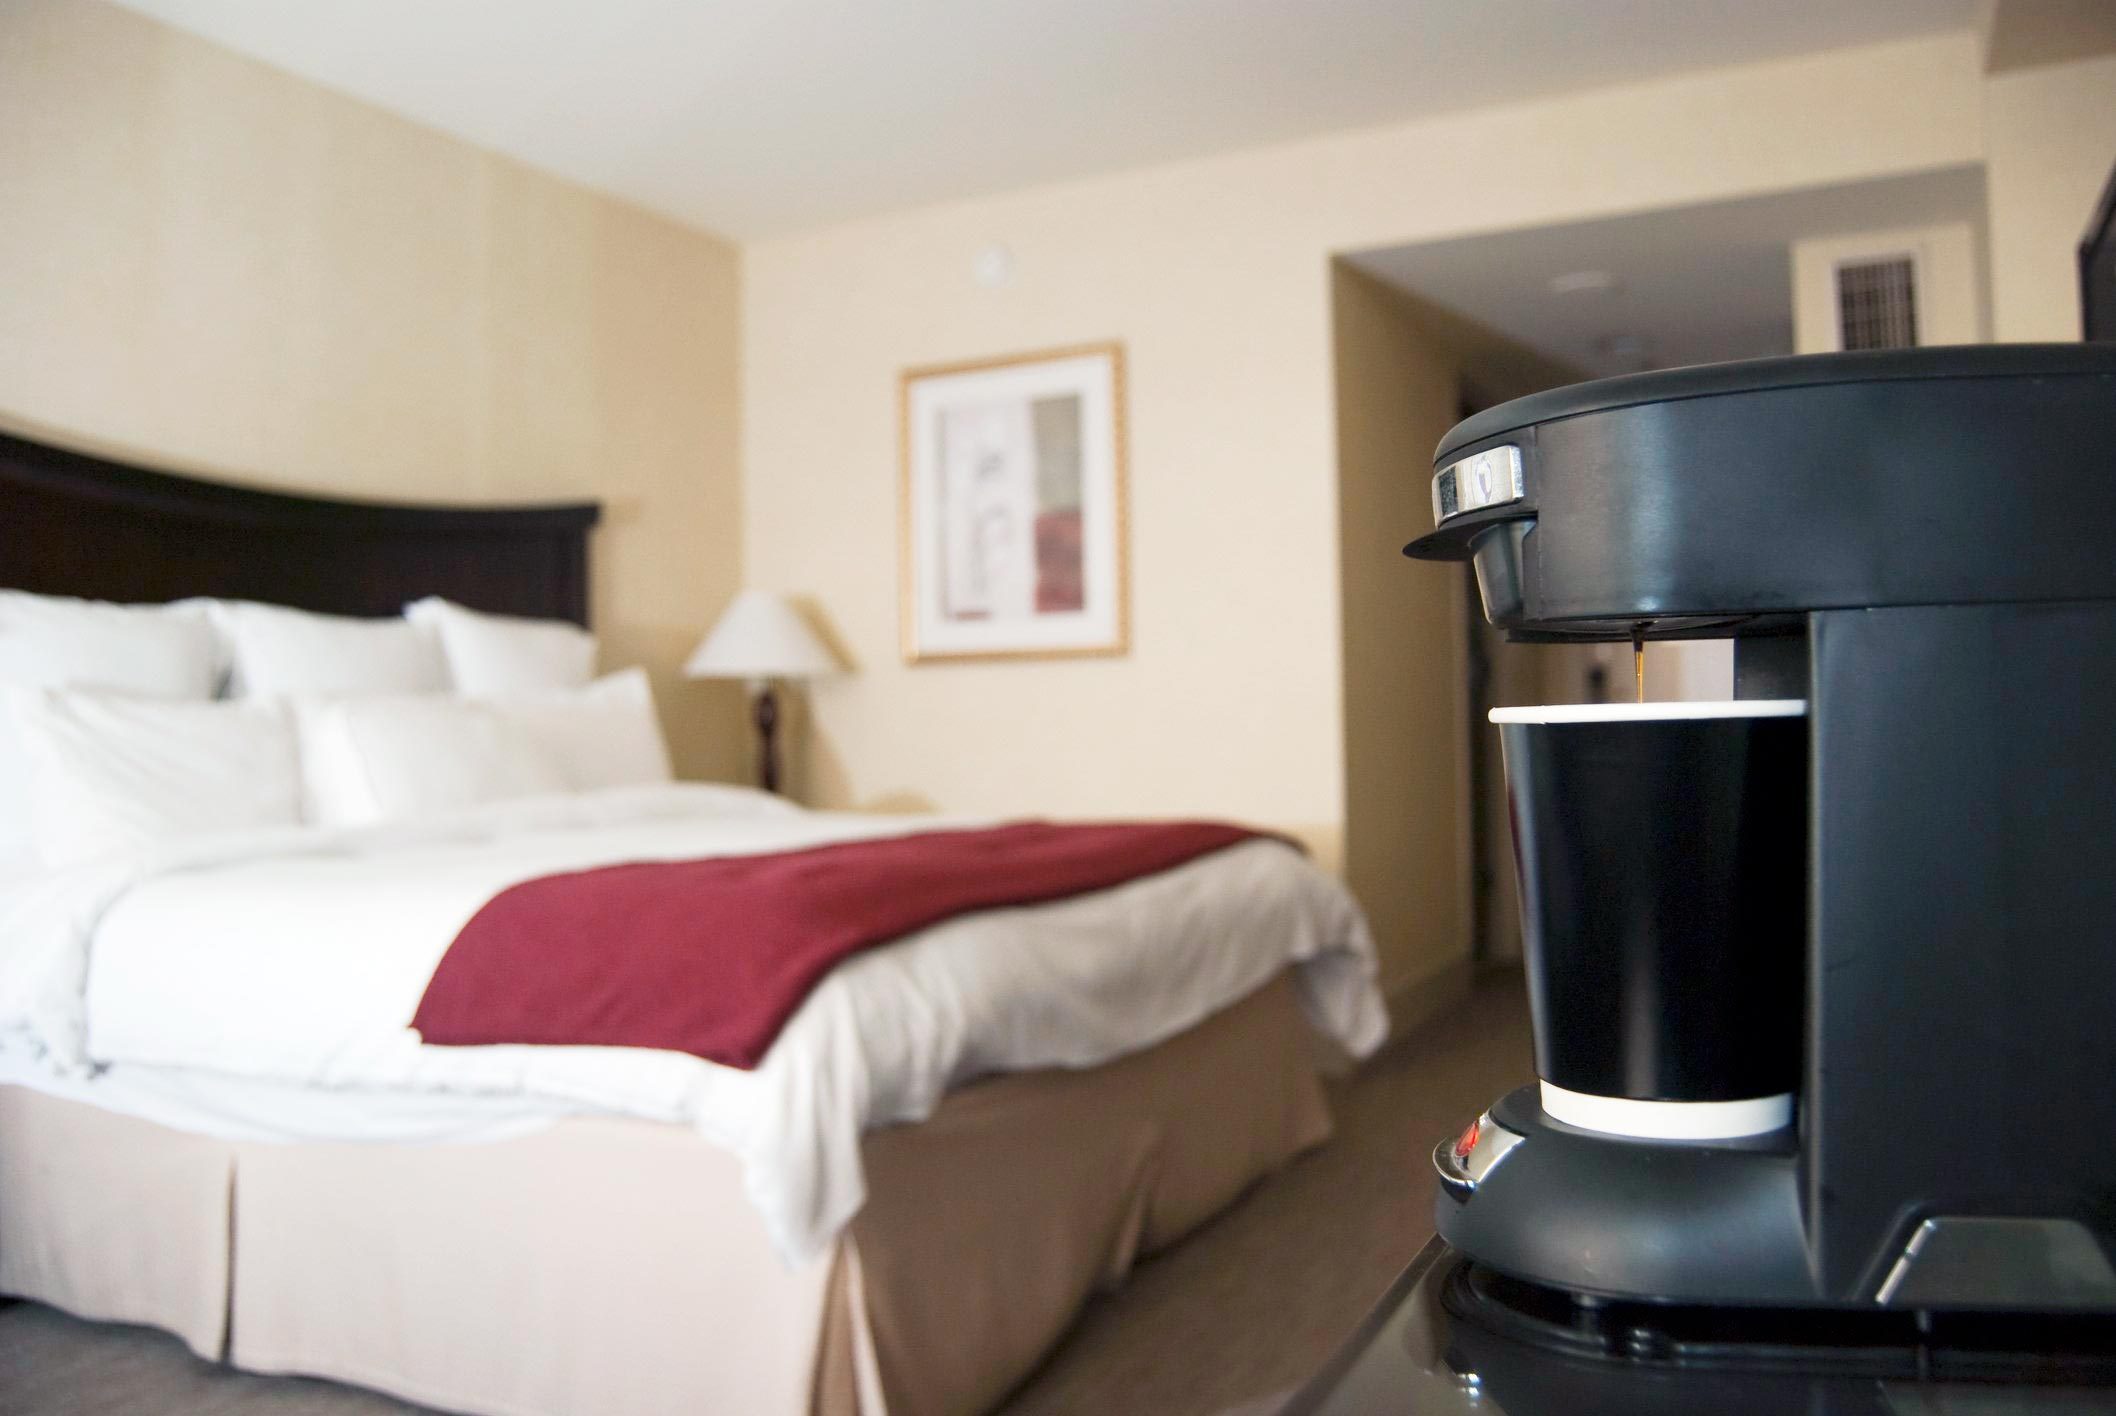 Hotel room with coffee maker